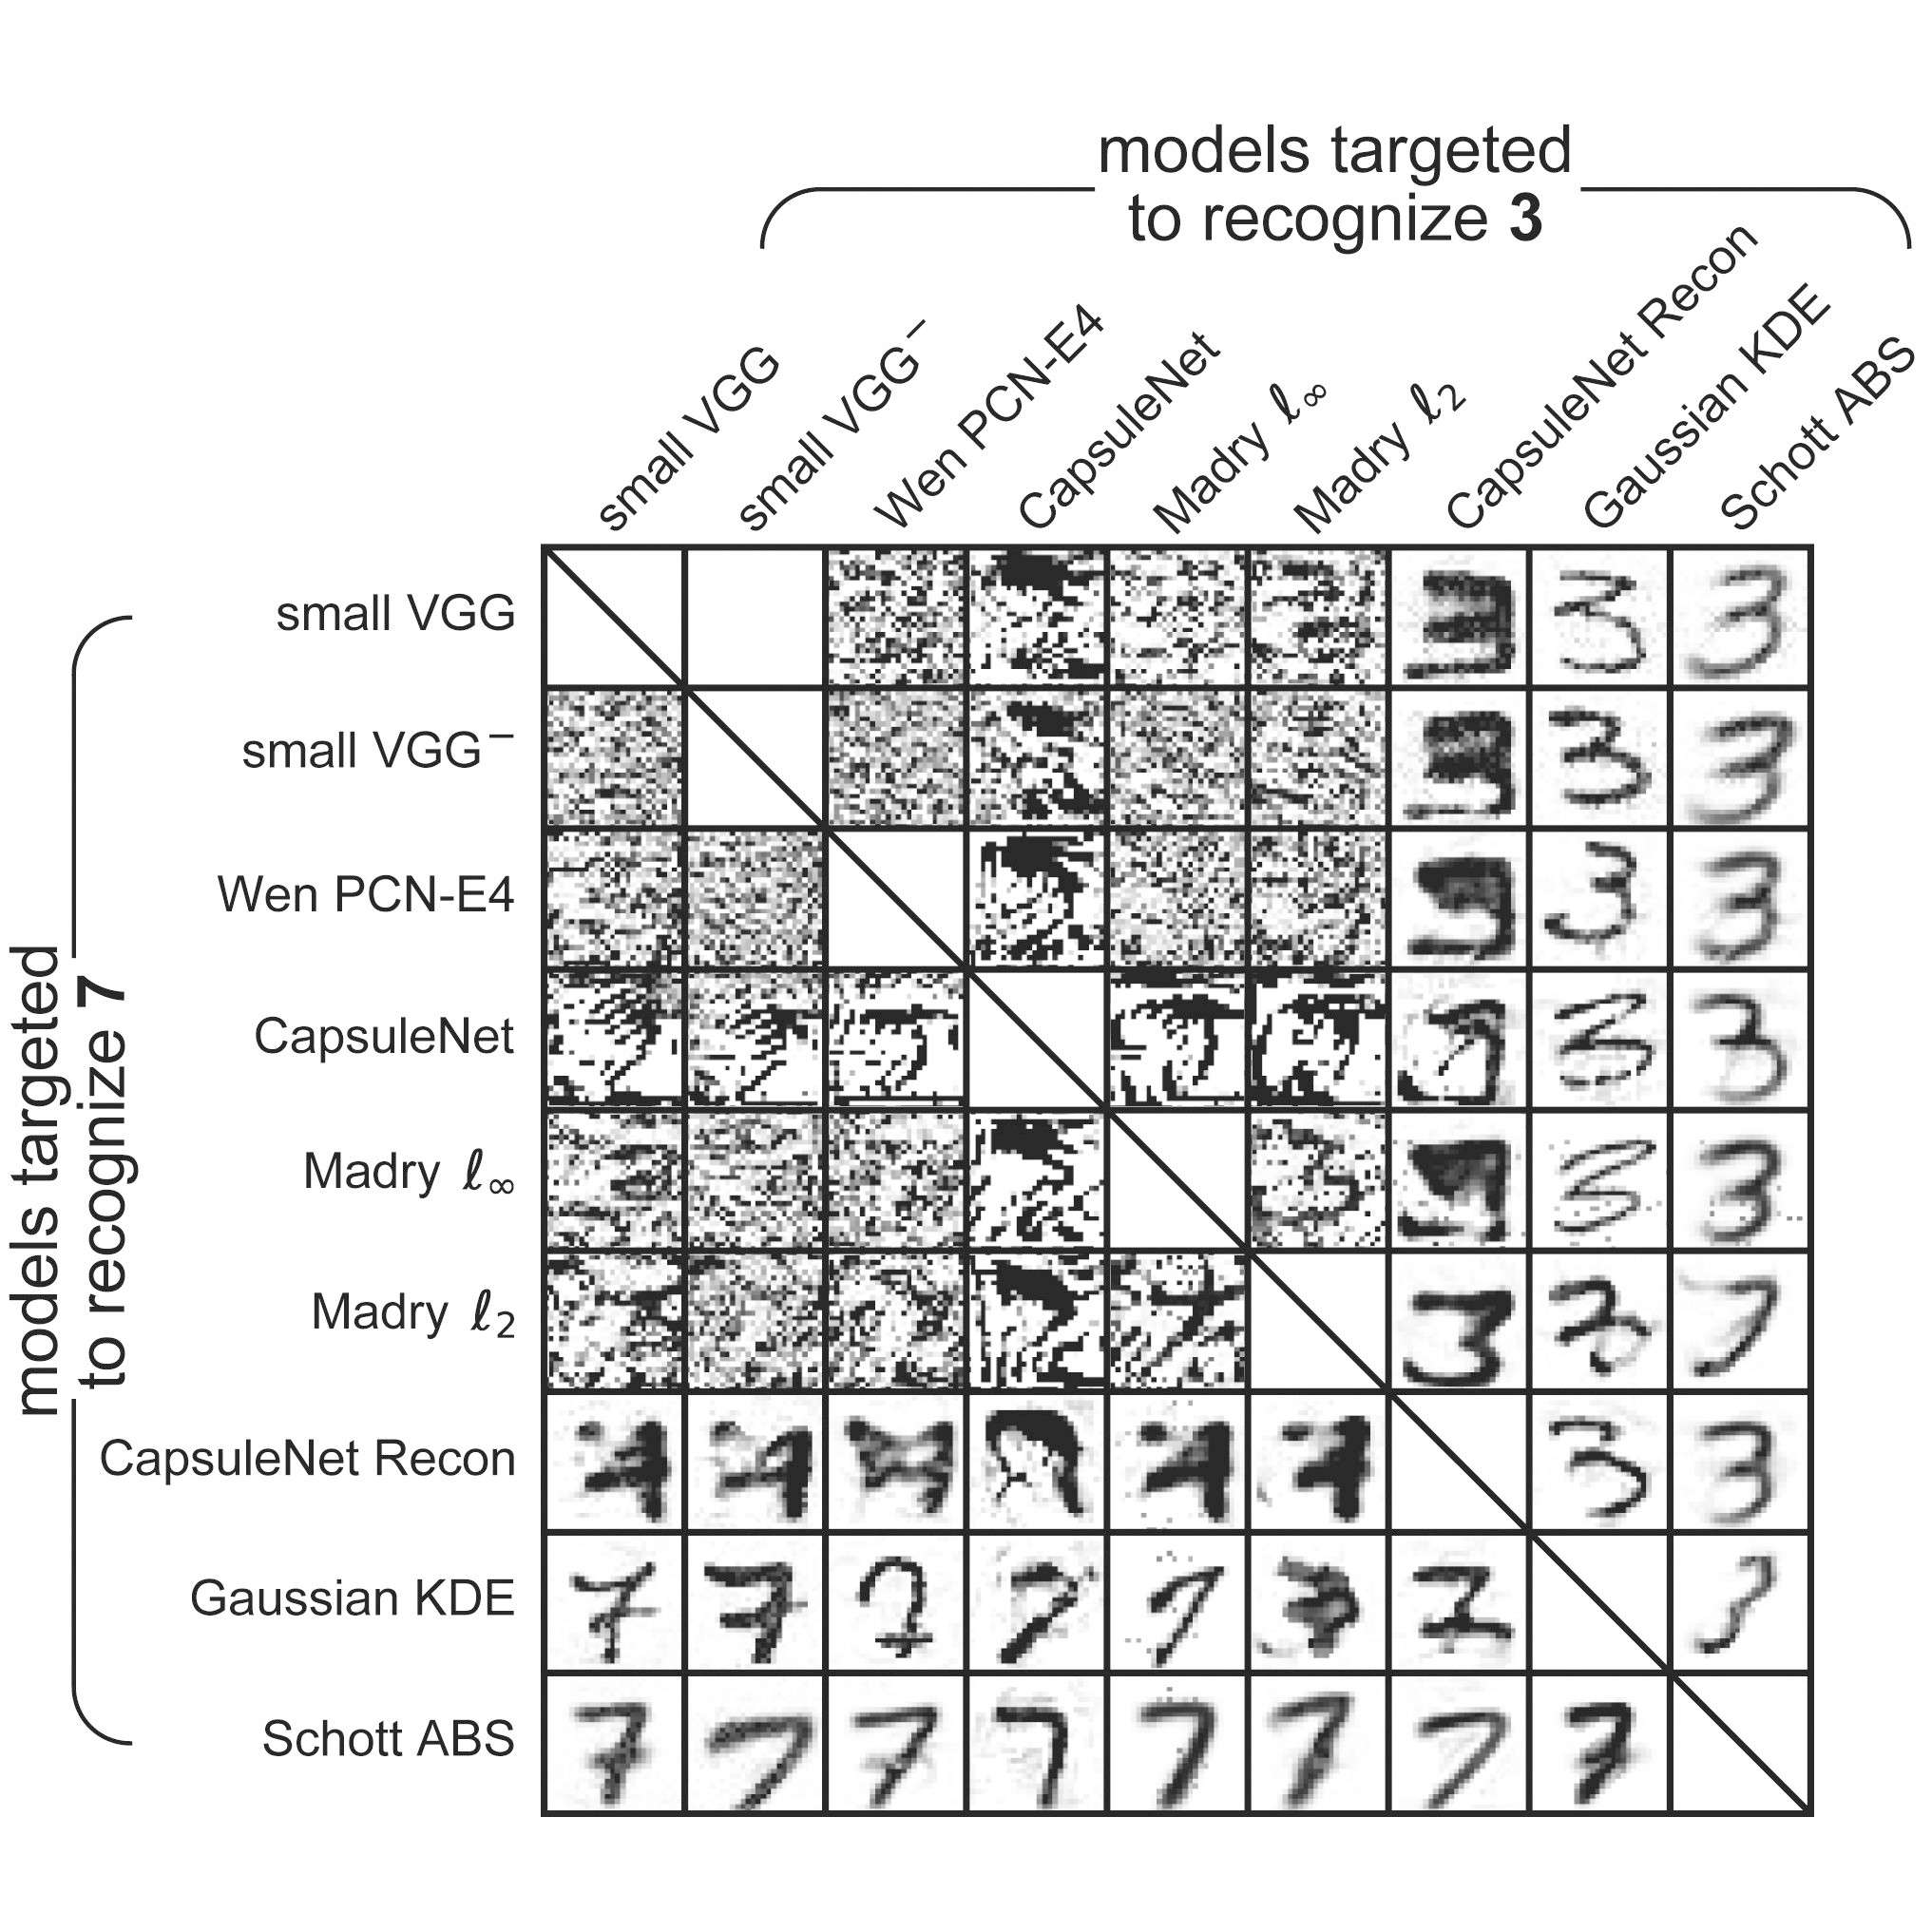 Controversial stimuli: Pitting neural networks against each other as models of human cognition